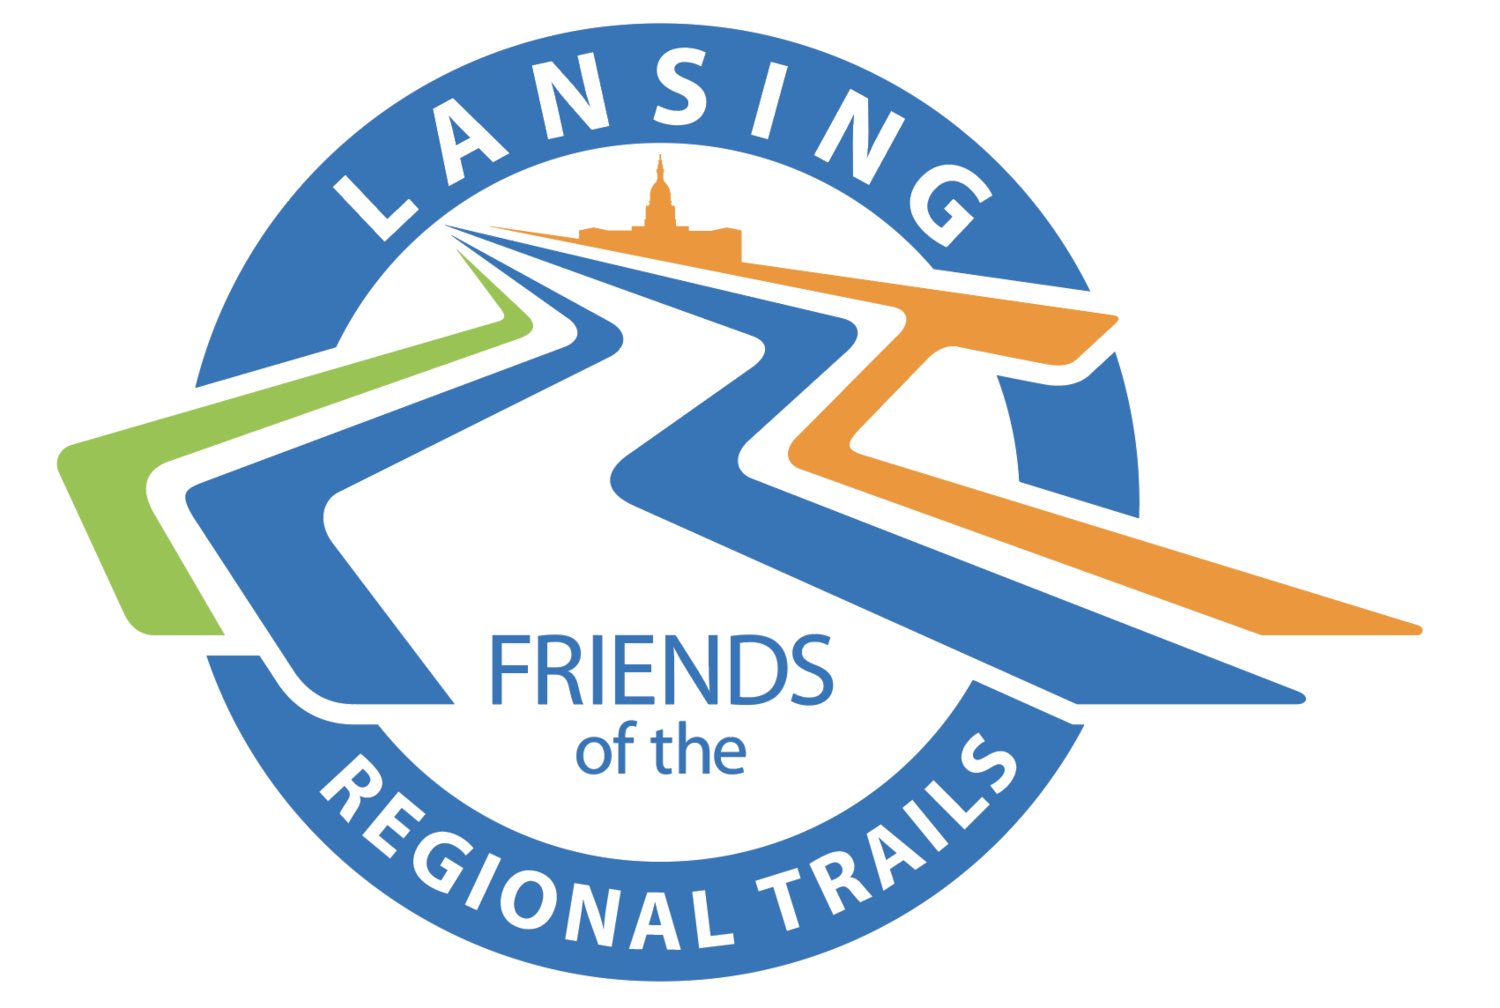 Friends of the Lansing Regional Trails